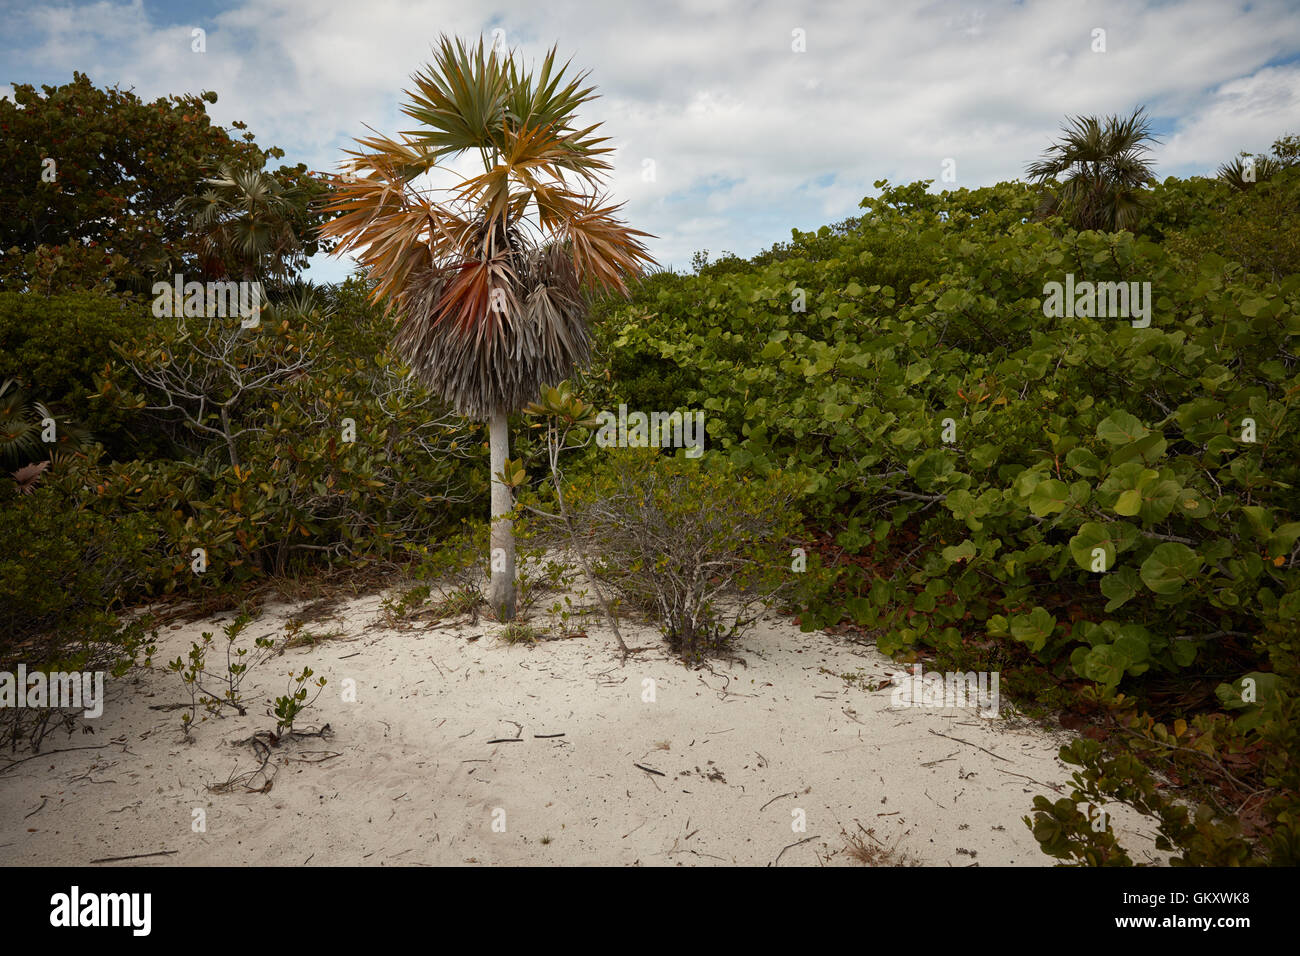 Palm tree in a clearing in a tropical forest at Bahia Honda State Park, Florida Stock Photo